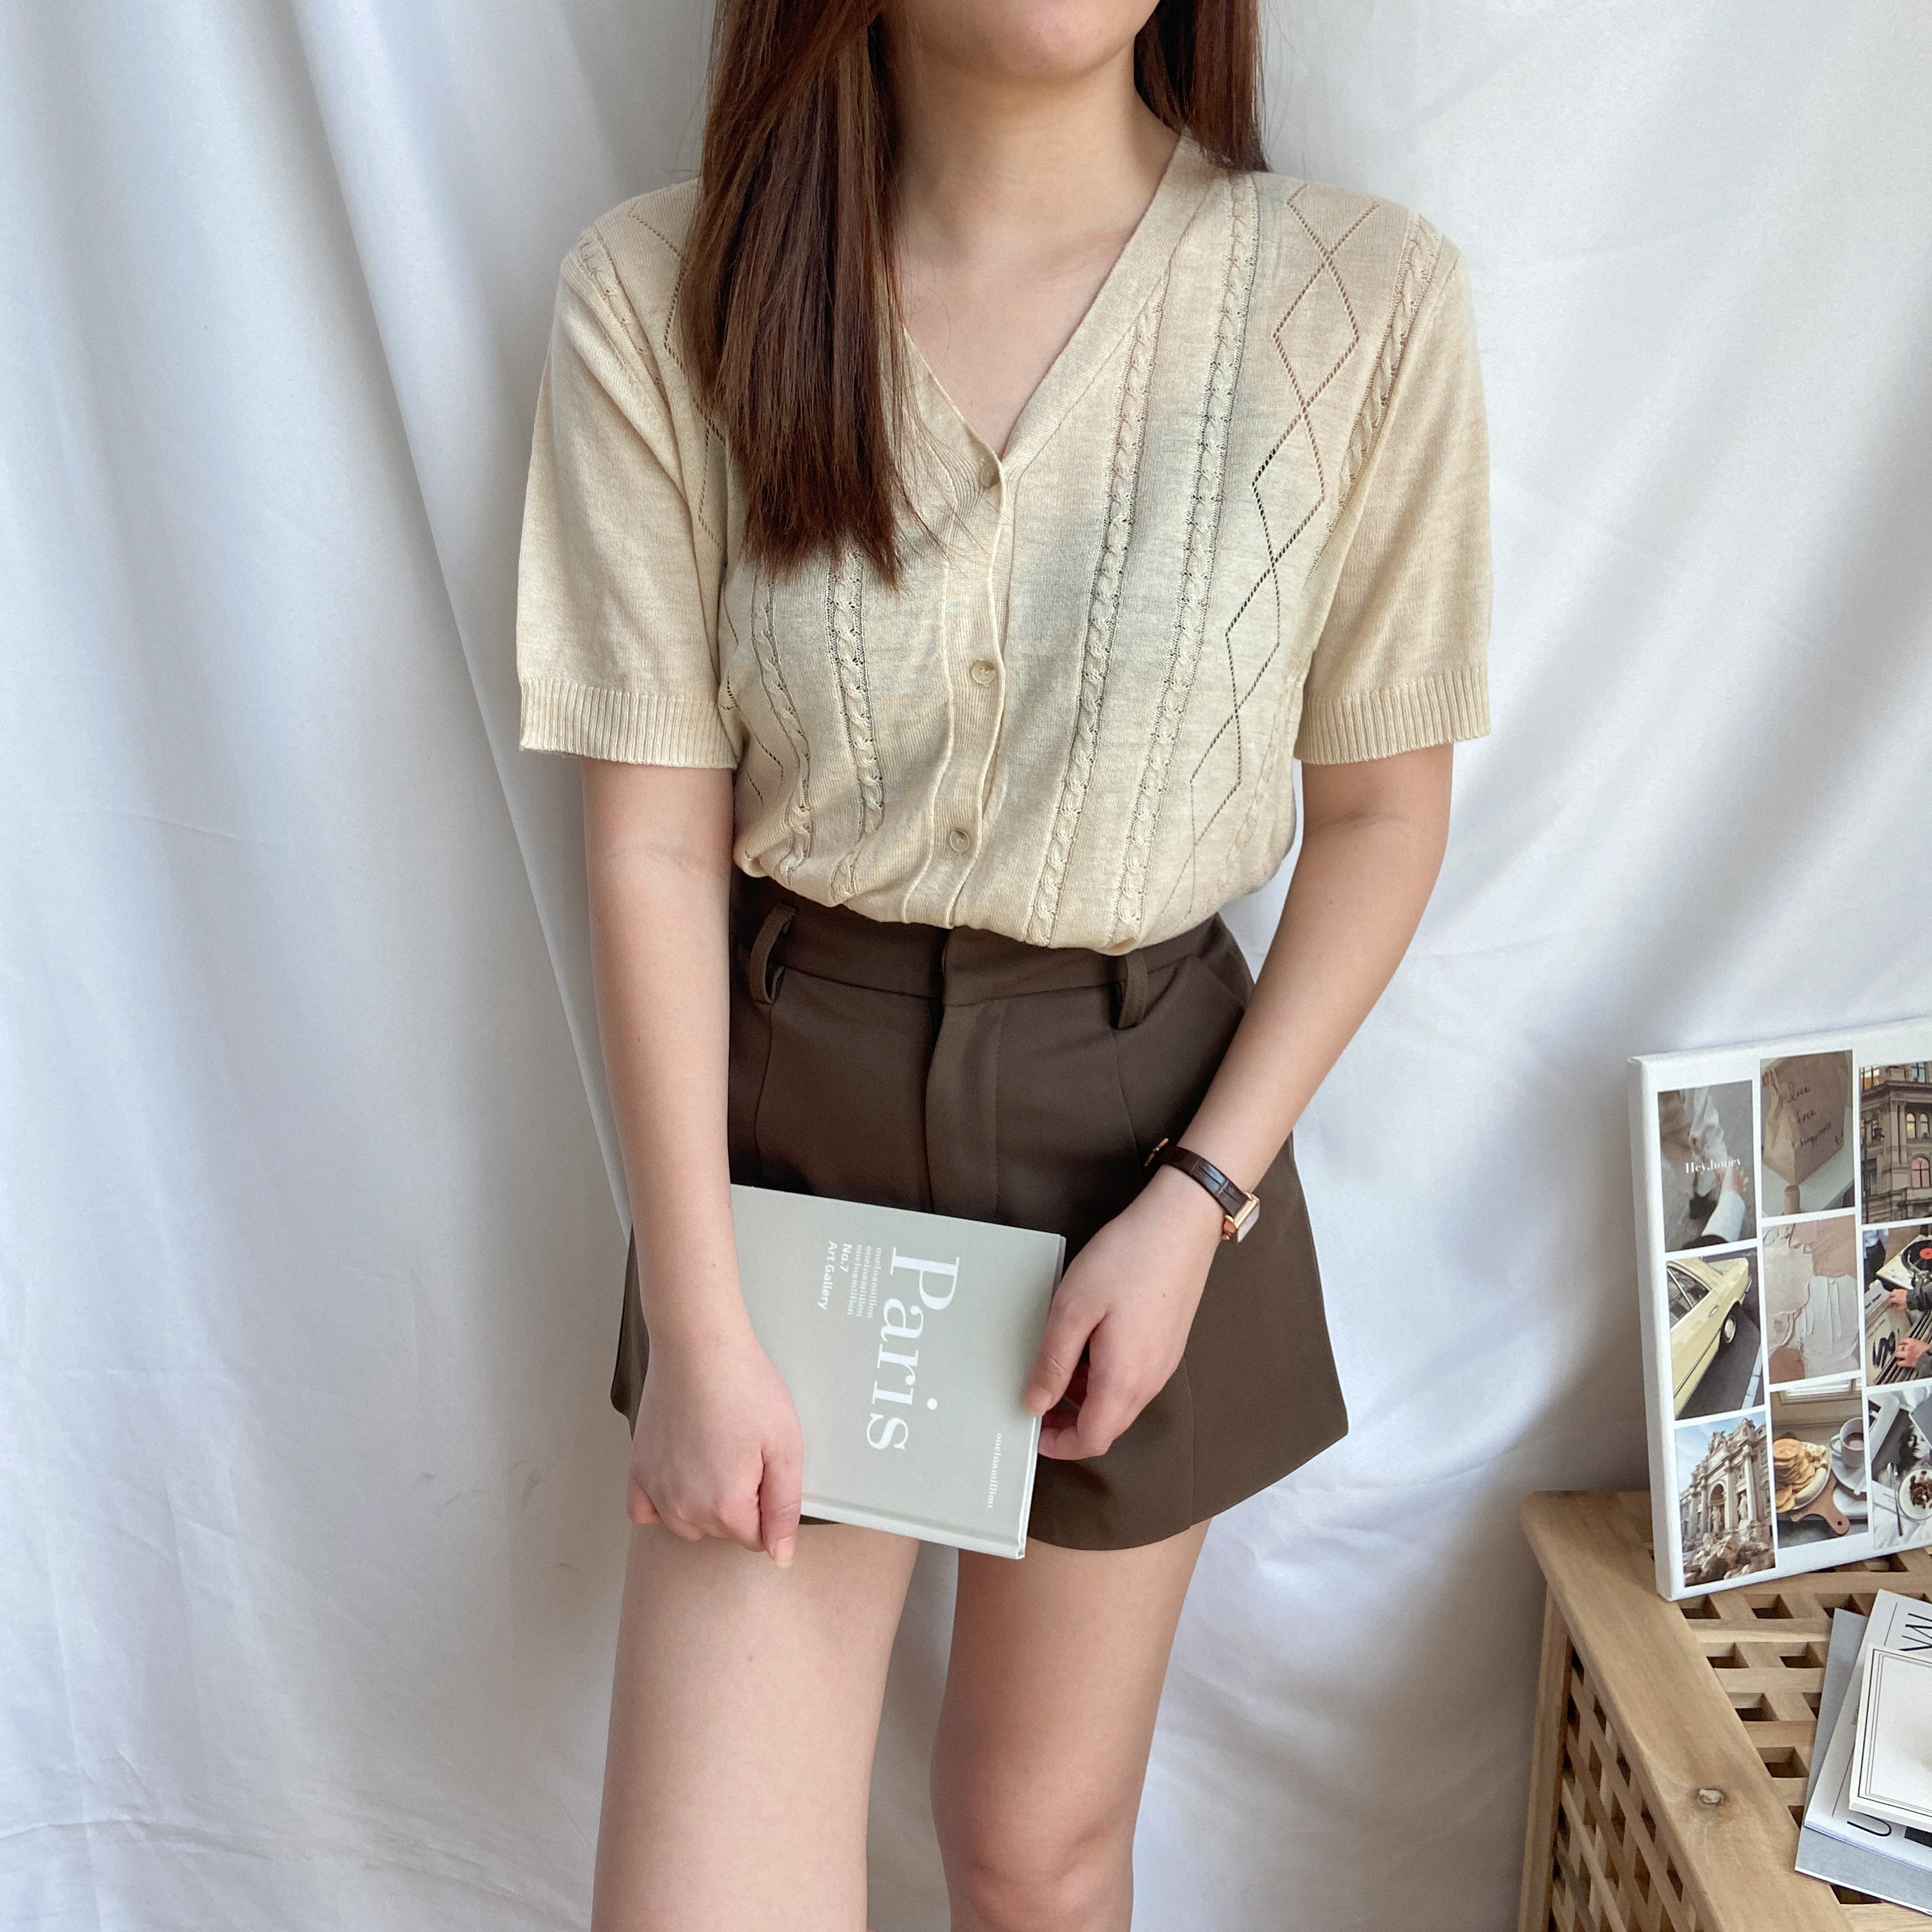 Crochet Knitted Comfy Top in Beige 钩花针织短袖开衫